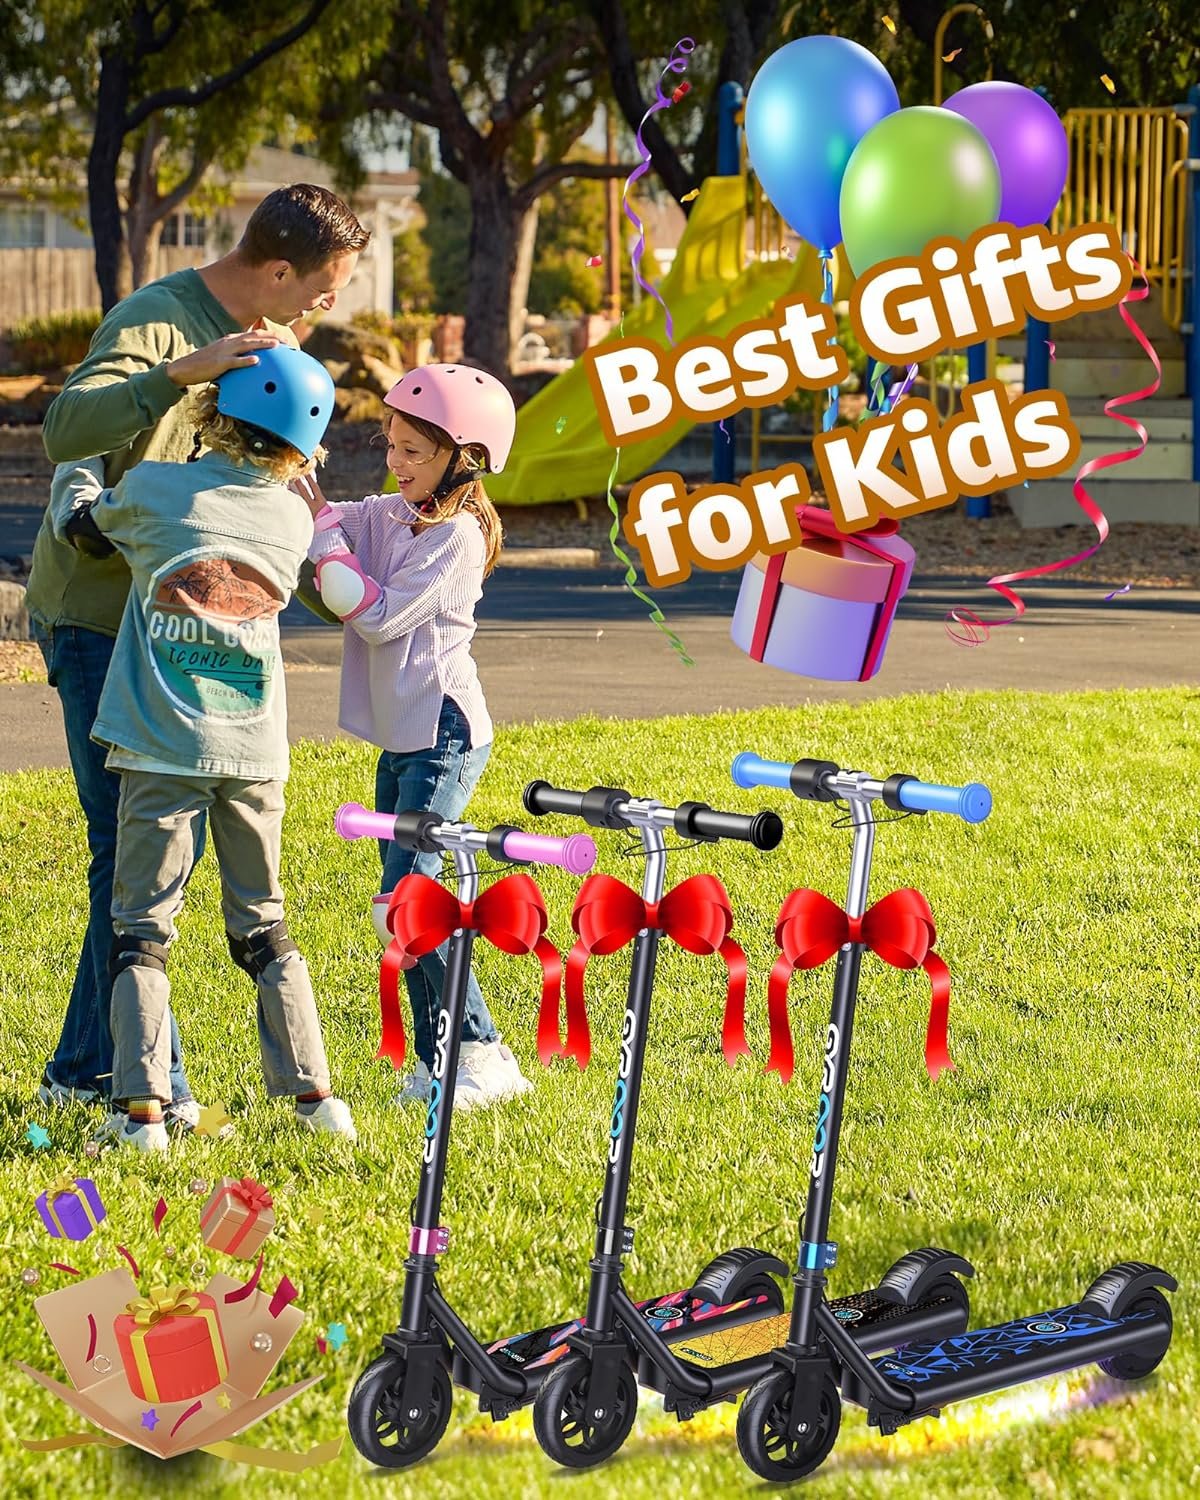 Gyroor H30 Max Electric Scooter for Kids Ages 8-12, 150W Powerful Motor, Bluetooth Music, Dual Brake System, Adjustable Height and Speed, Best Gifts for Kids